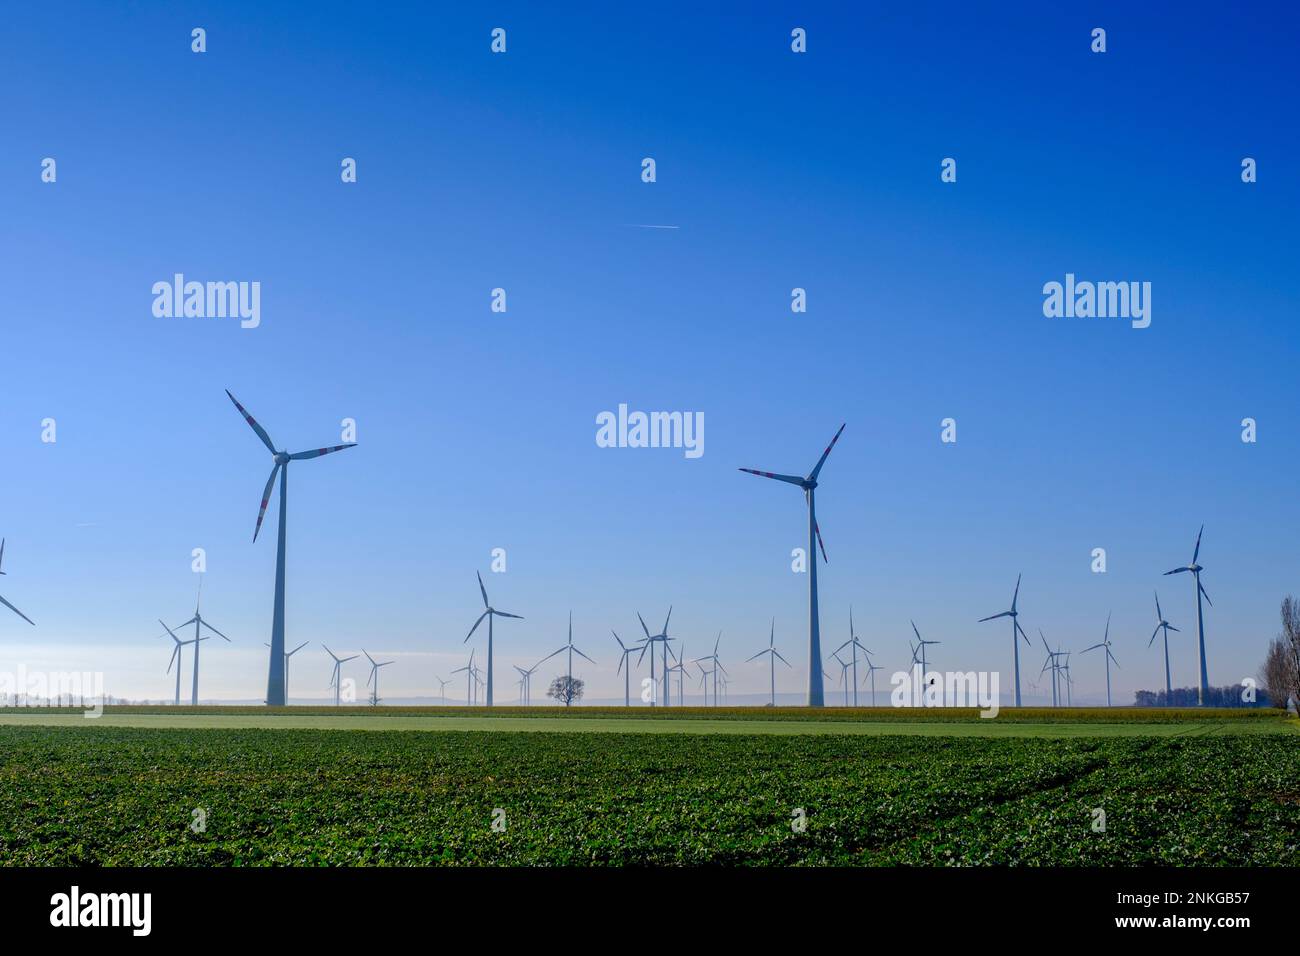 Austria, Lower Austria, Petronell-Carnuntum, View of countryside wind farm at dusk Stock Photo